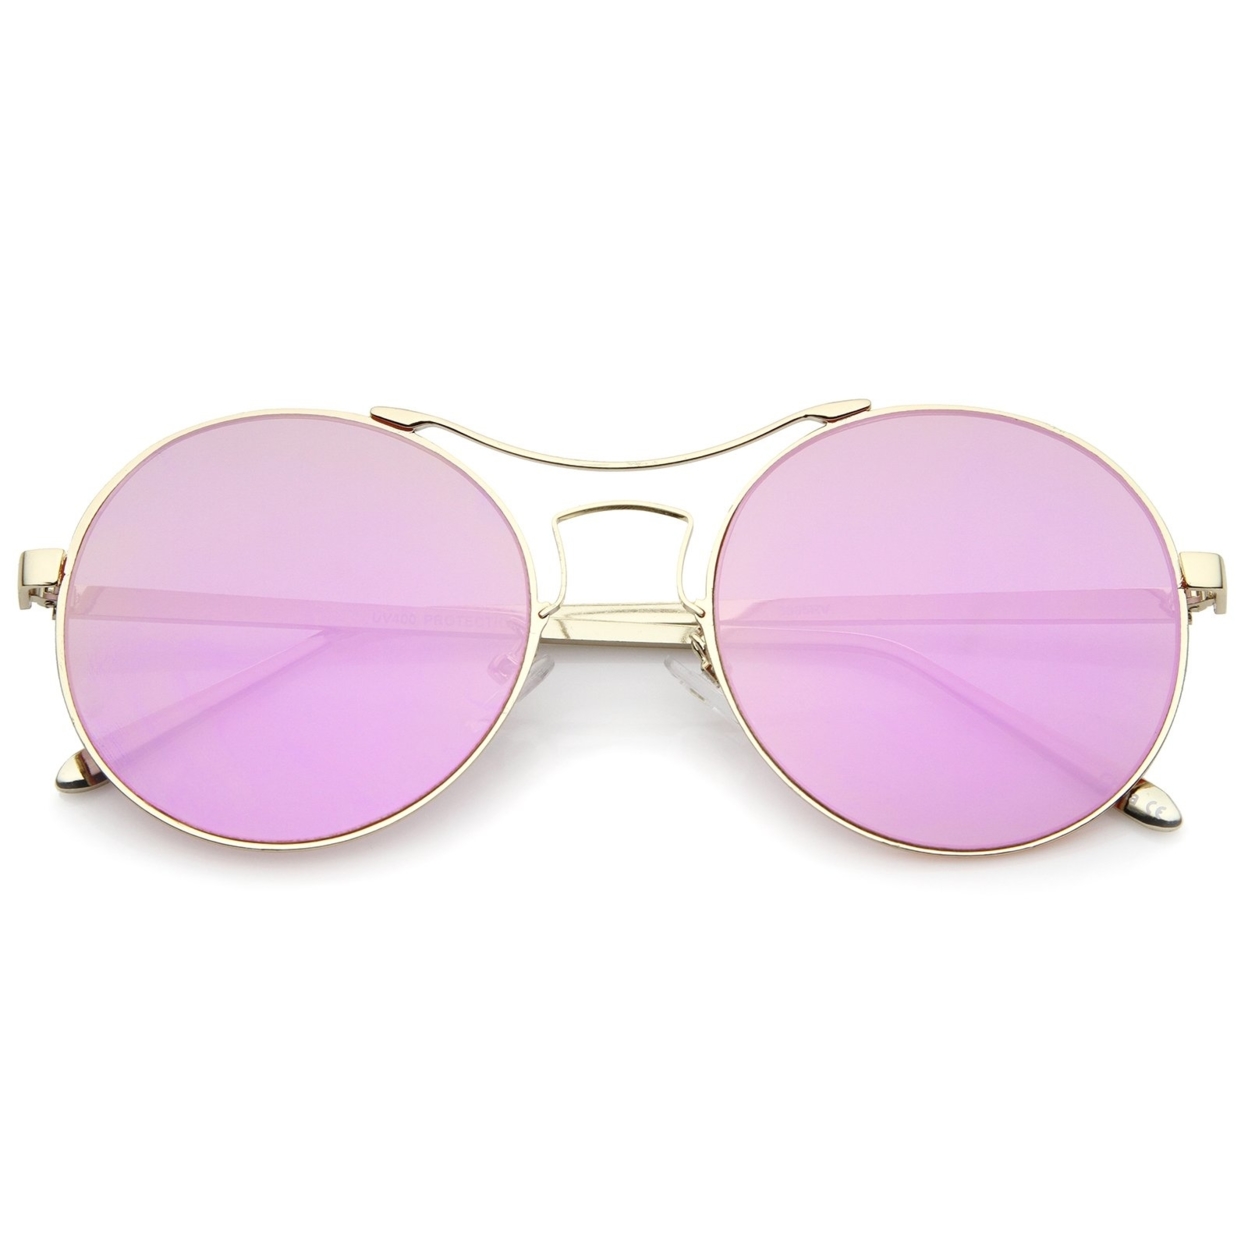 Modern Thin Metal Frame Curved Brow Bar Colored Mirror Flat Lens Round Sunglasses 55mm - Gold / Gold Mirror